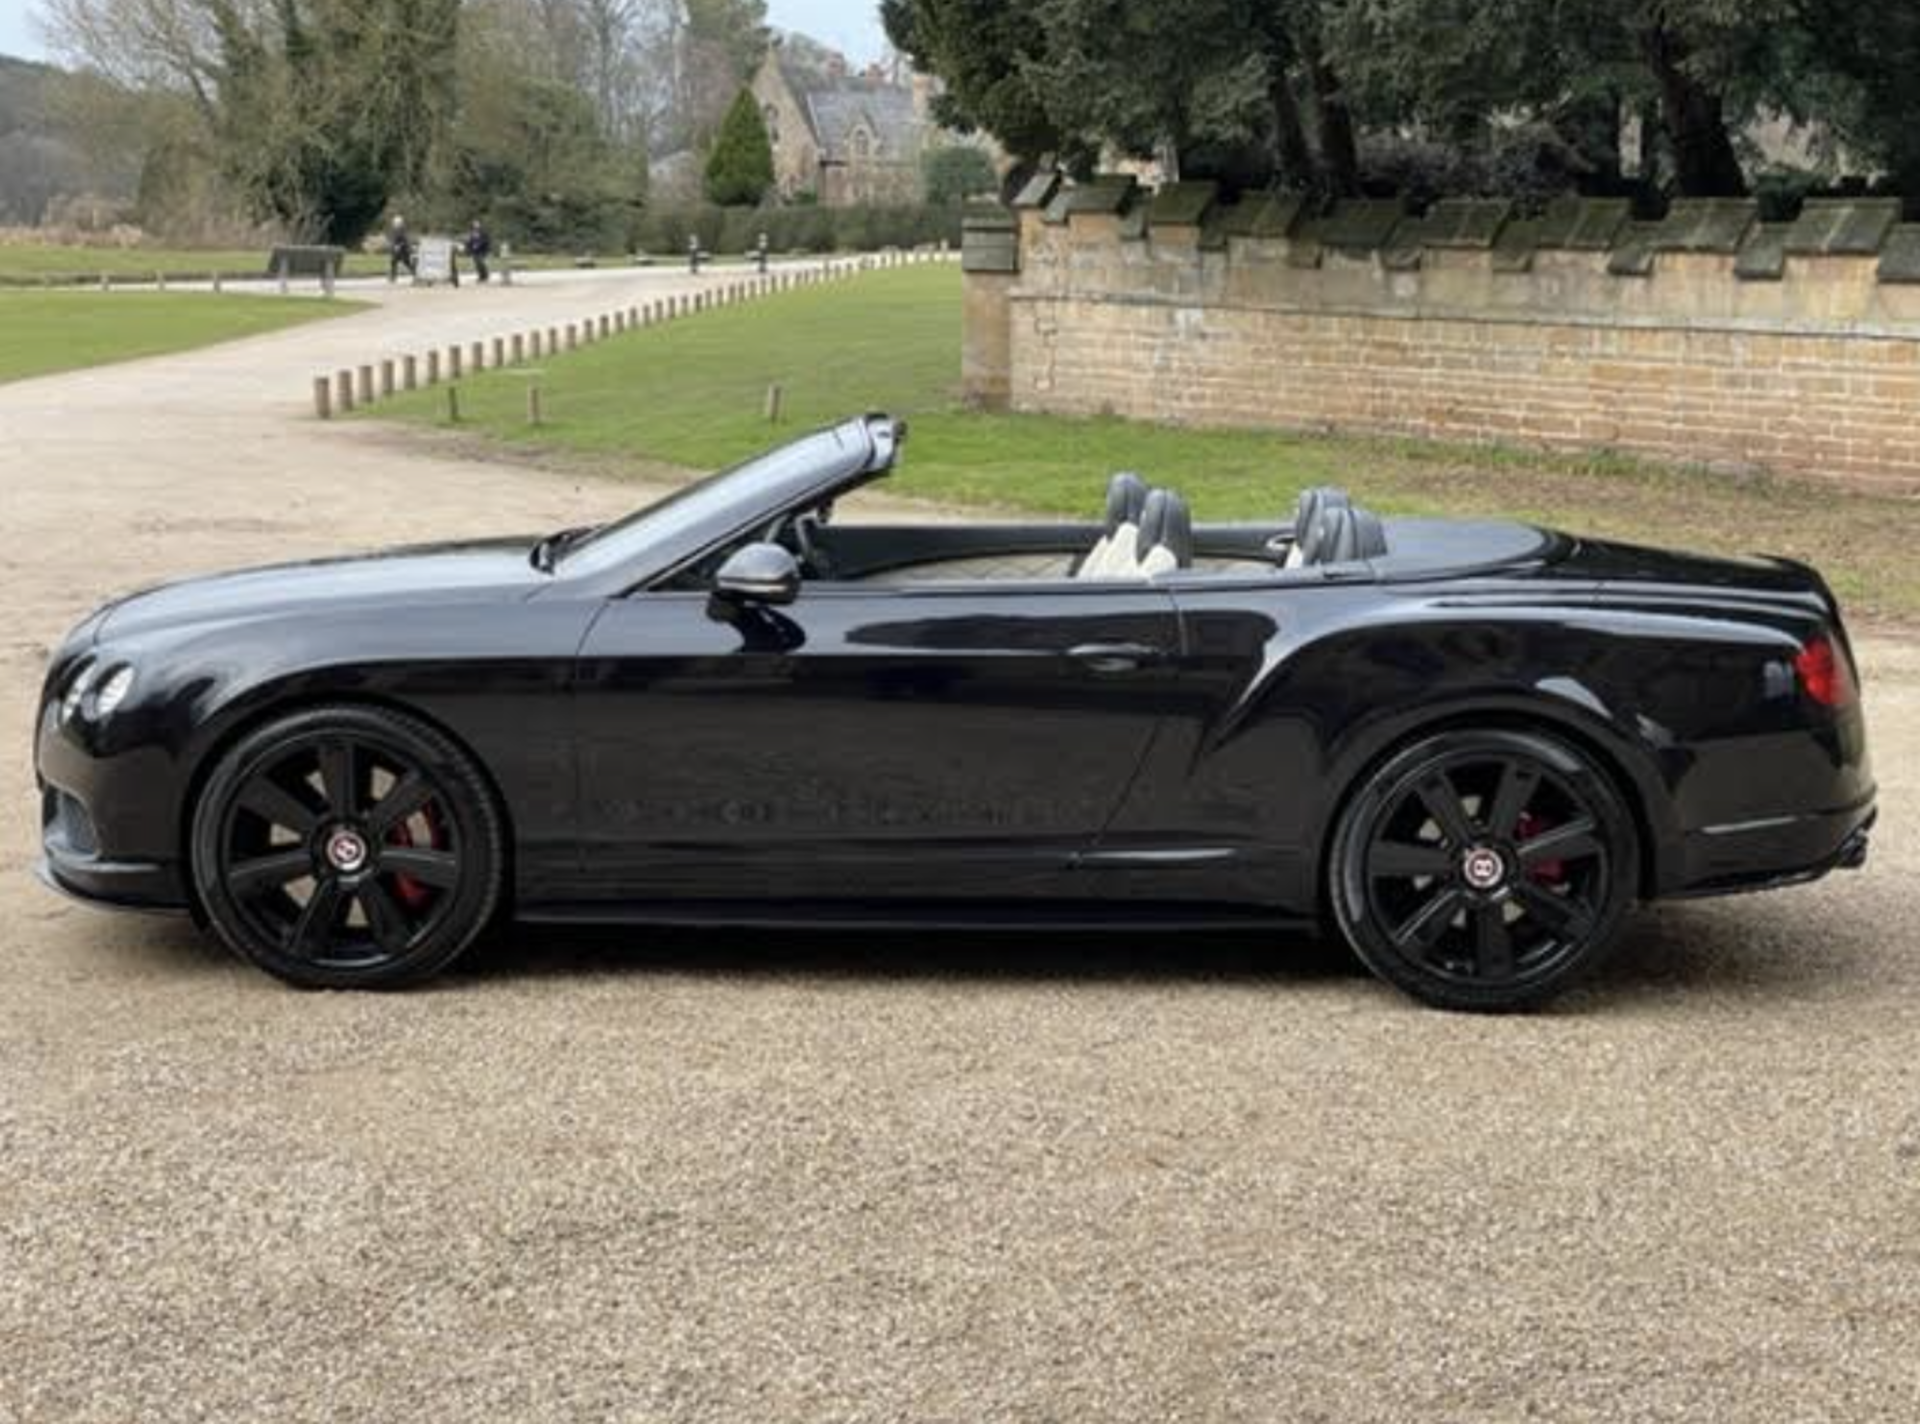 2015 Bentley Continental GTC 4.0 V8 S 2dr Auto Concourse series - Black pack 58,000 miles Full S/H - Image 15 of 18